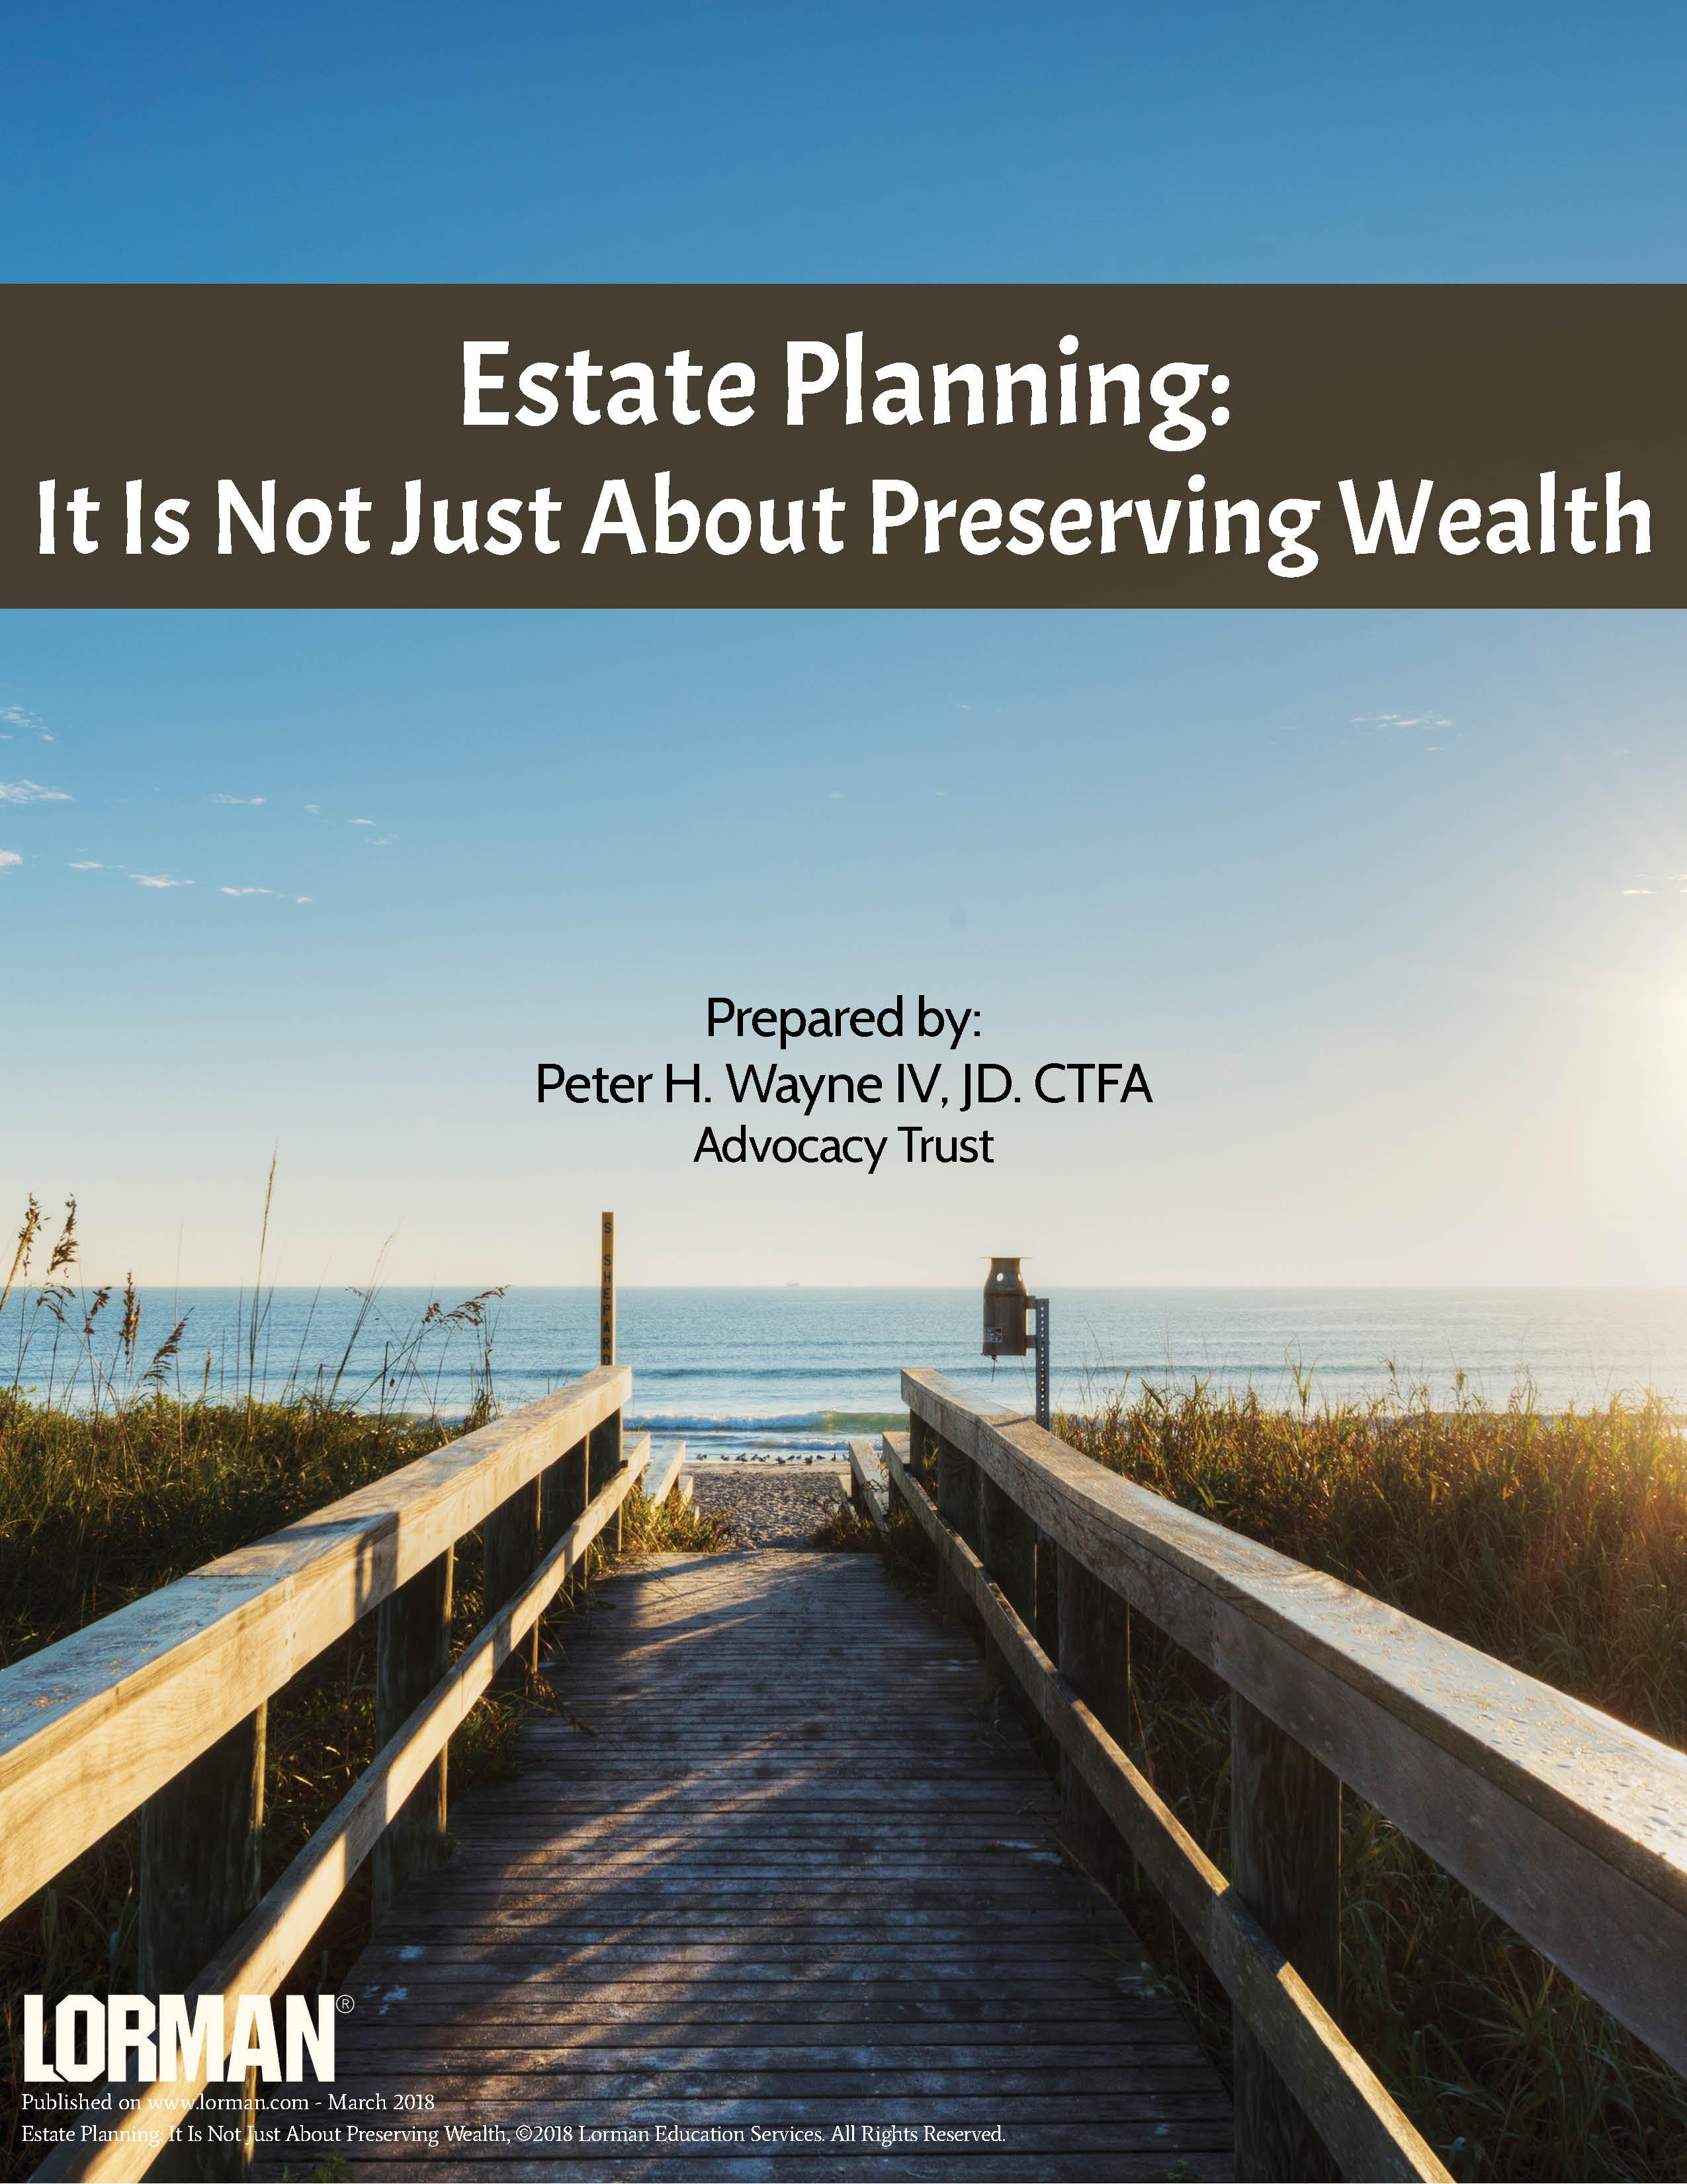 Estate Planning: It Is Not Just About Preserving Wealth